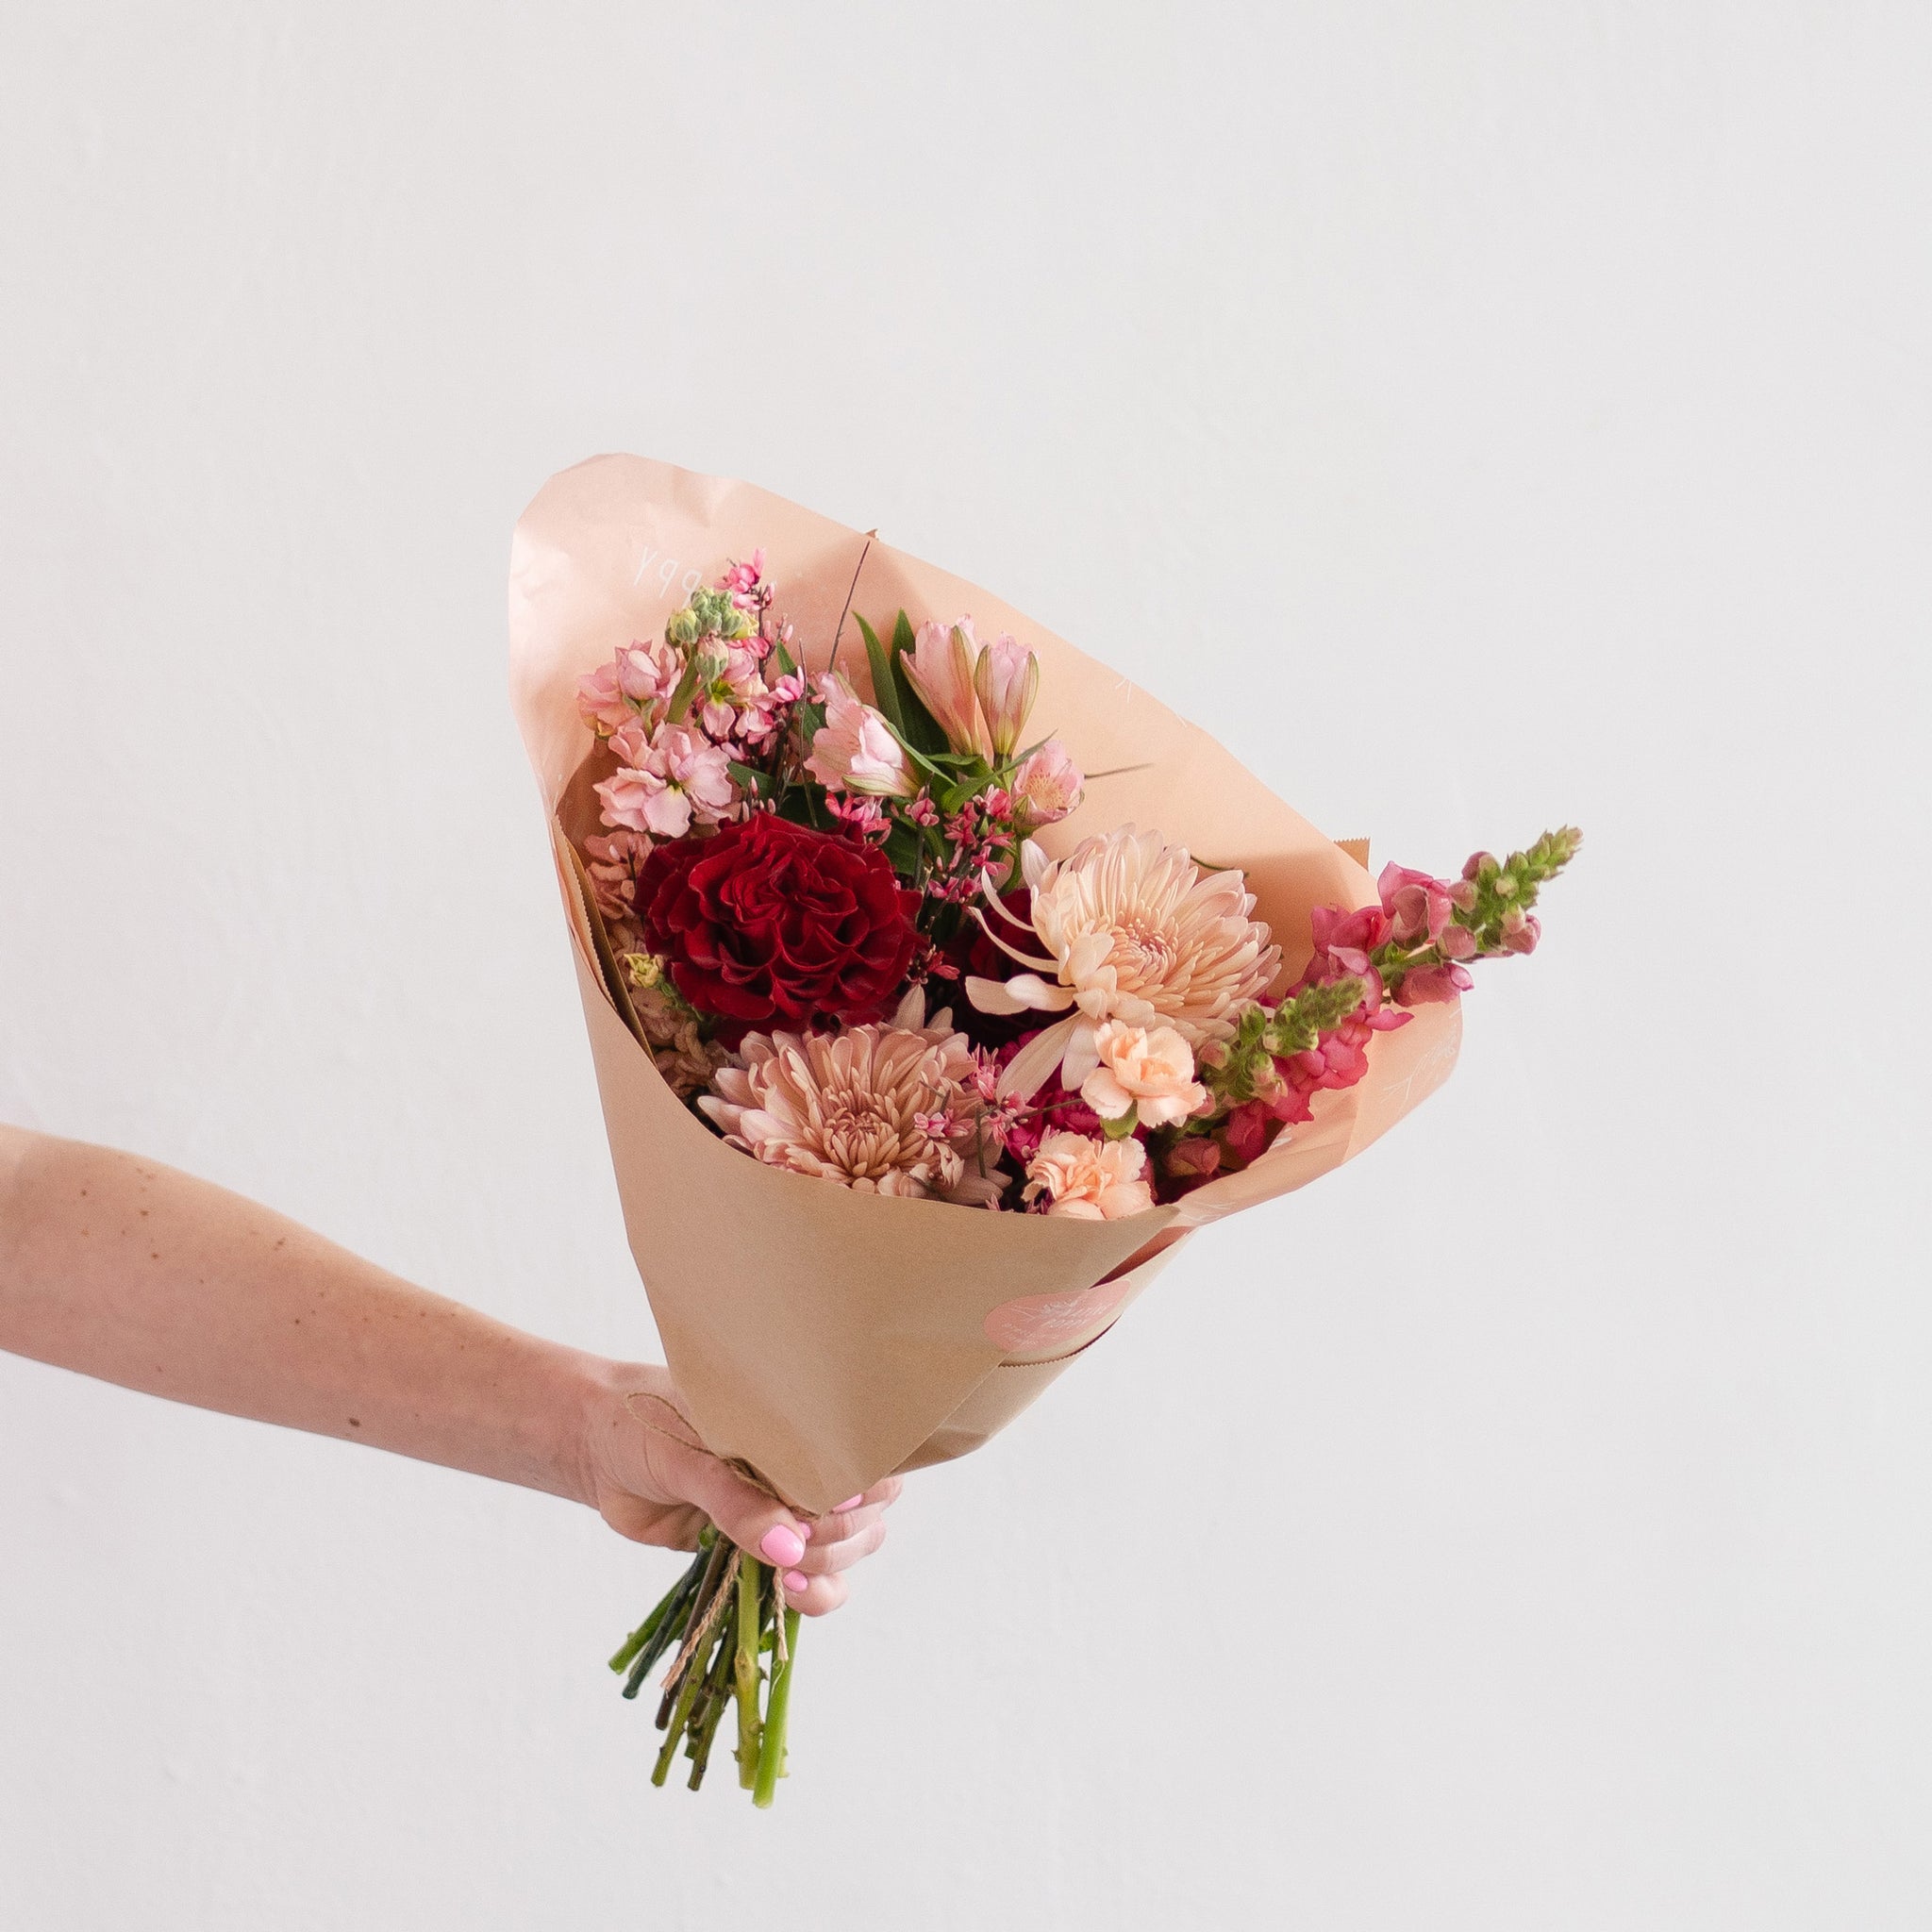 Classic Valentine Flower Bouquet in red, peach, and pink